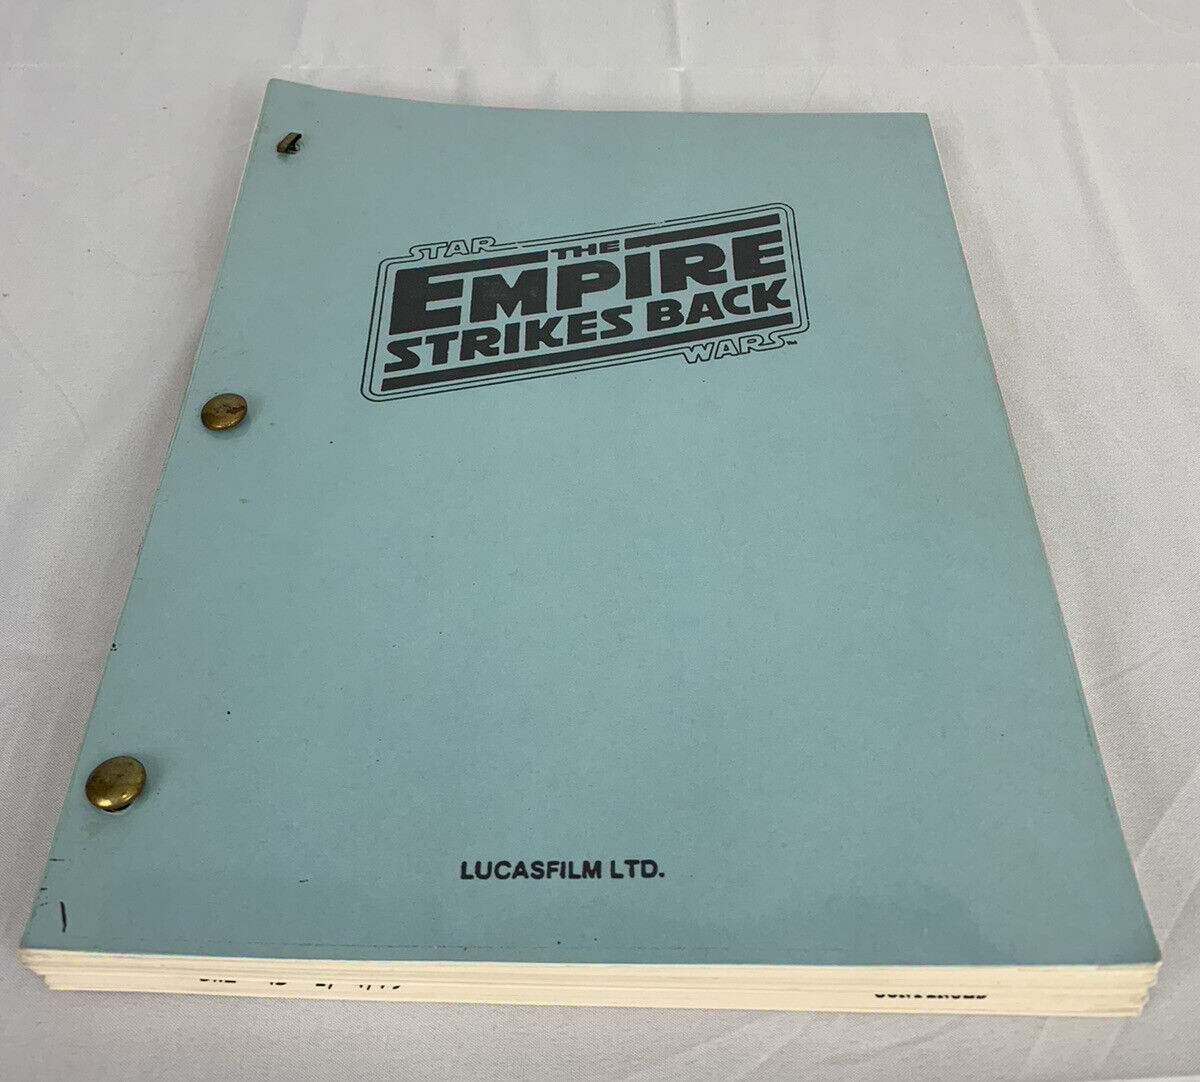 Star Wars Episode V Manuscript - Extremely Rare High End Star Wars Collectable